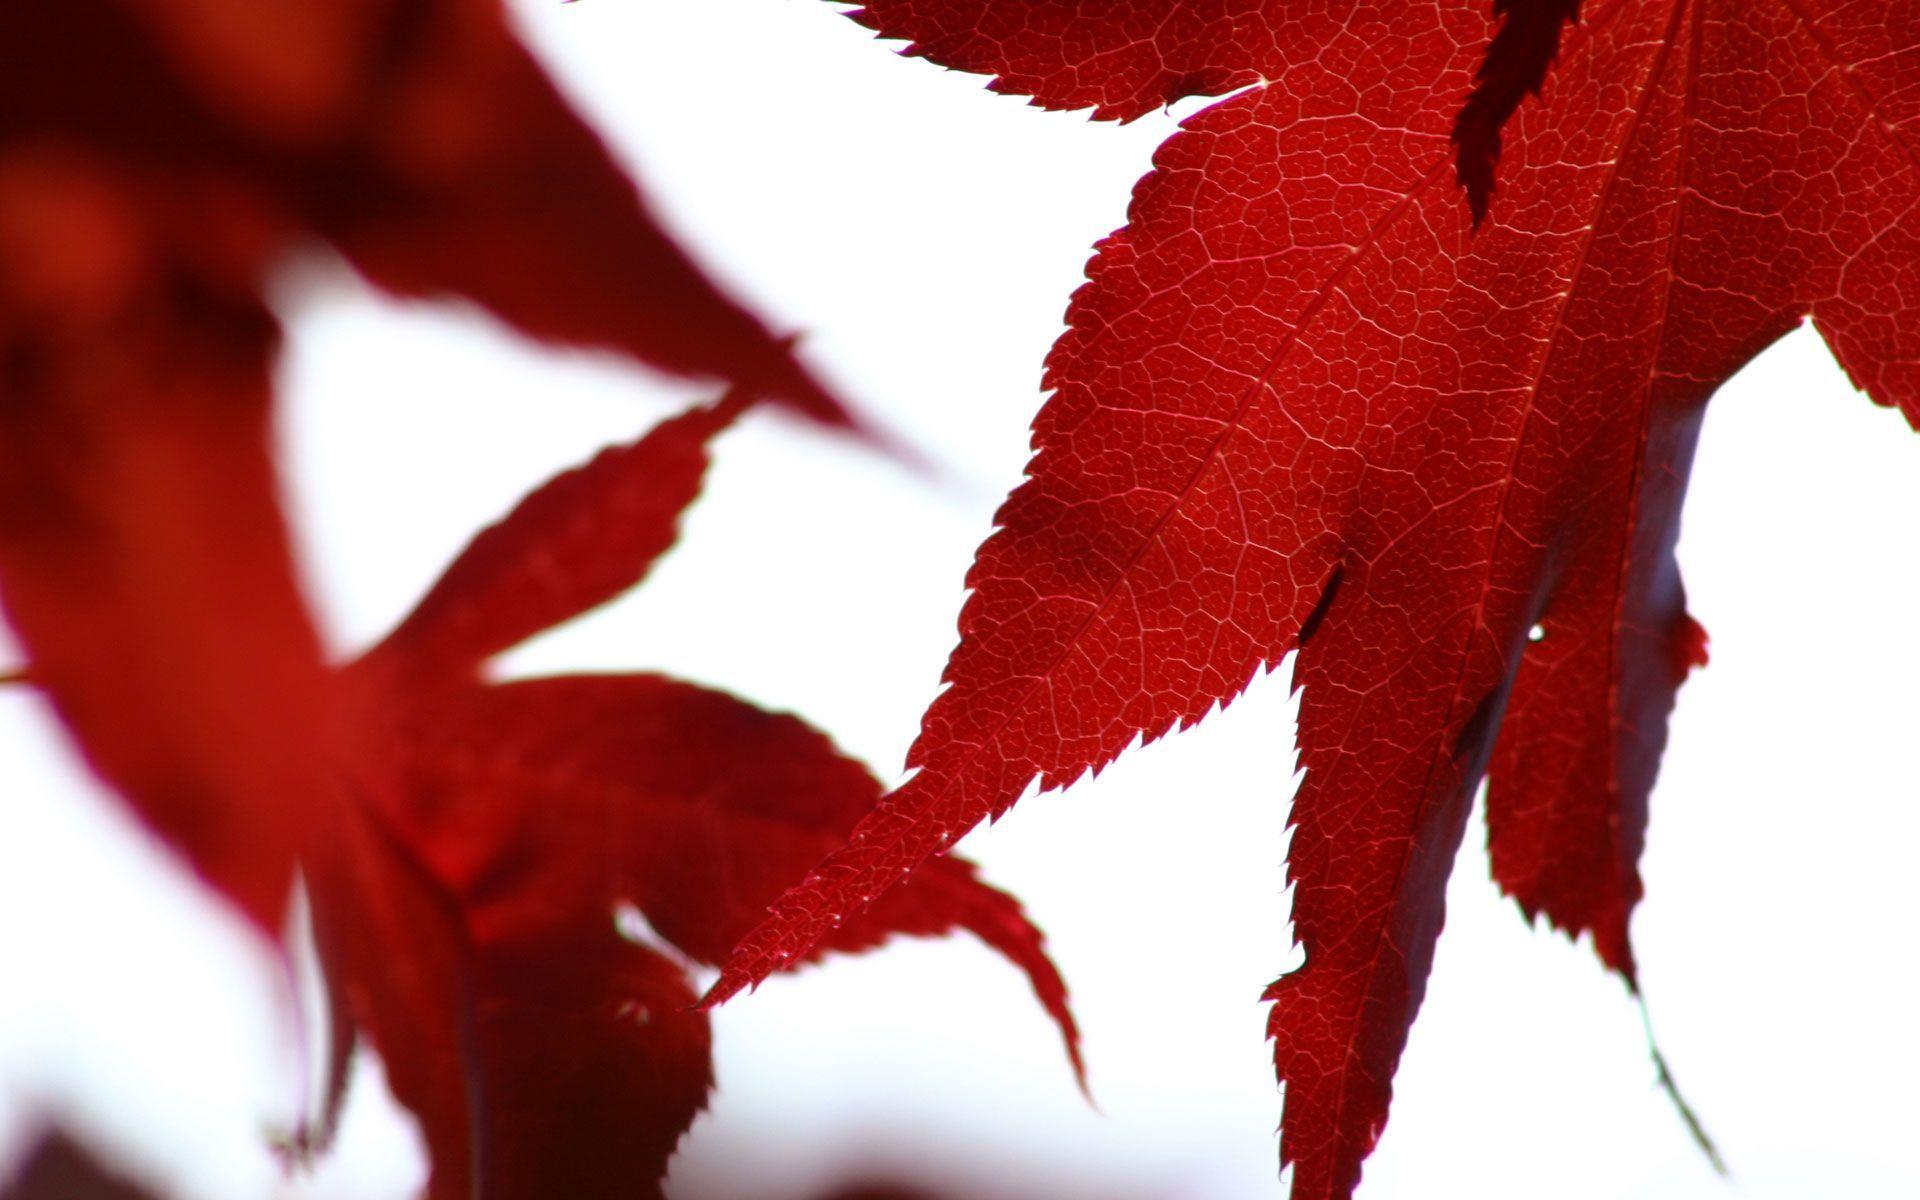 Abstract Big Red Leaves Wallpaper Picture Wide 1920x1200PX